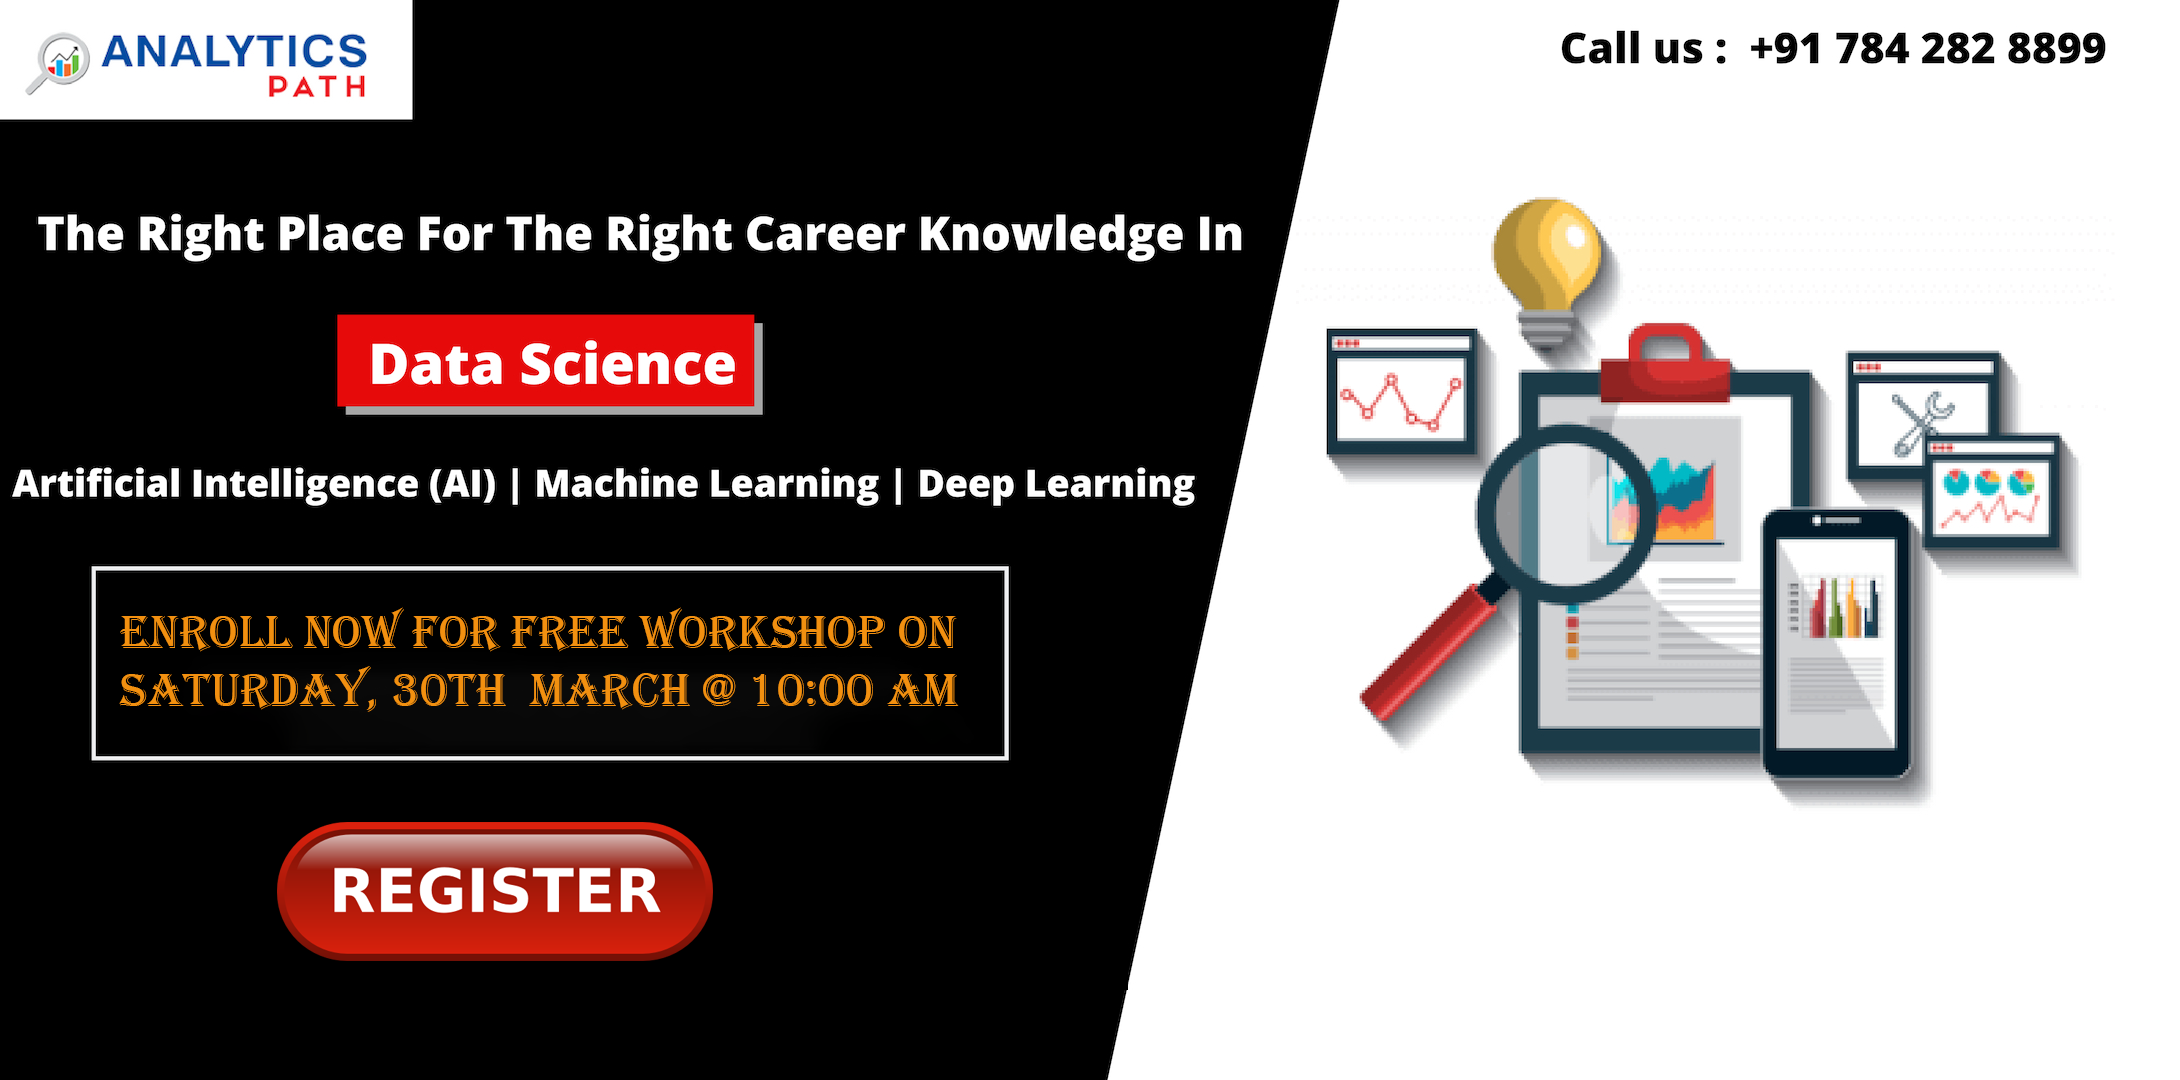 Attend Free Workshop On Data Science Training To Know Benefits Of Career In Analytics By Analytics Path On 30th March, 10 AM, Hyderabad, Hyderabad, Andhra Pradesh, India